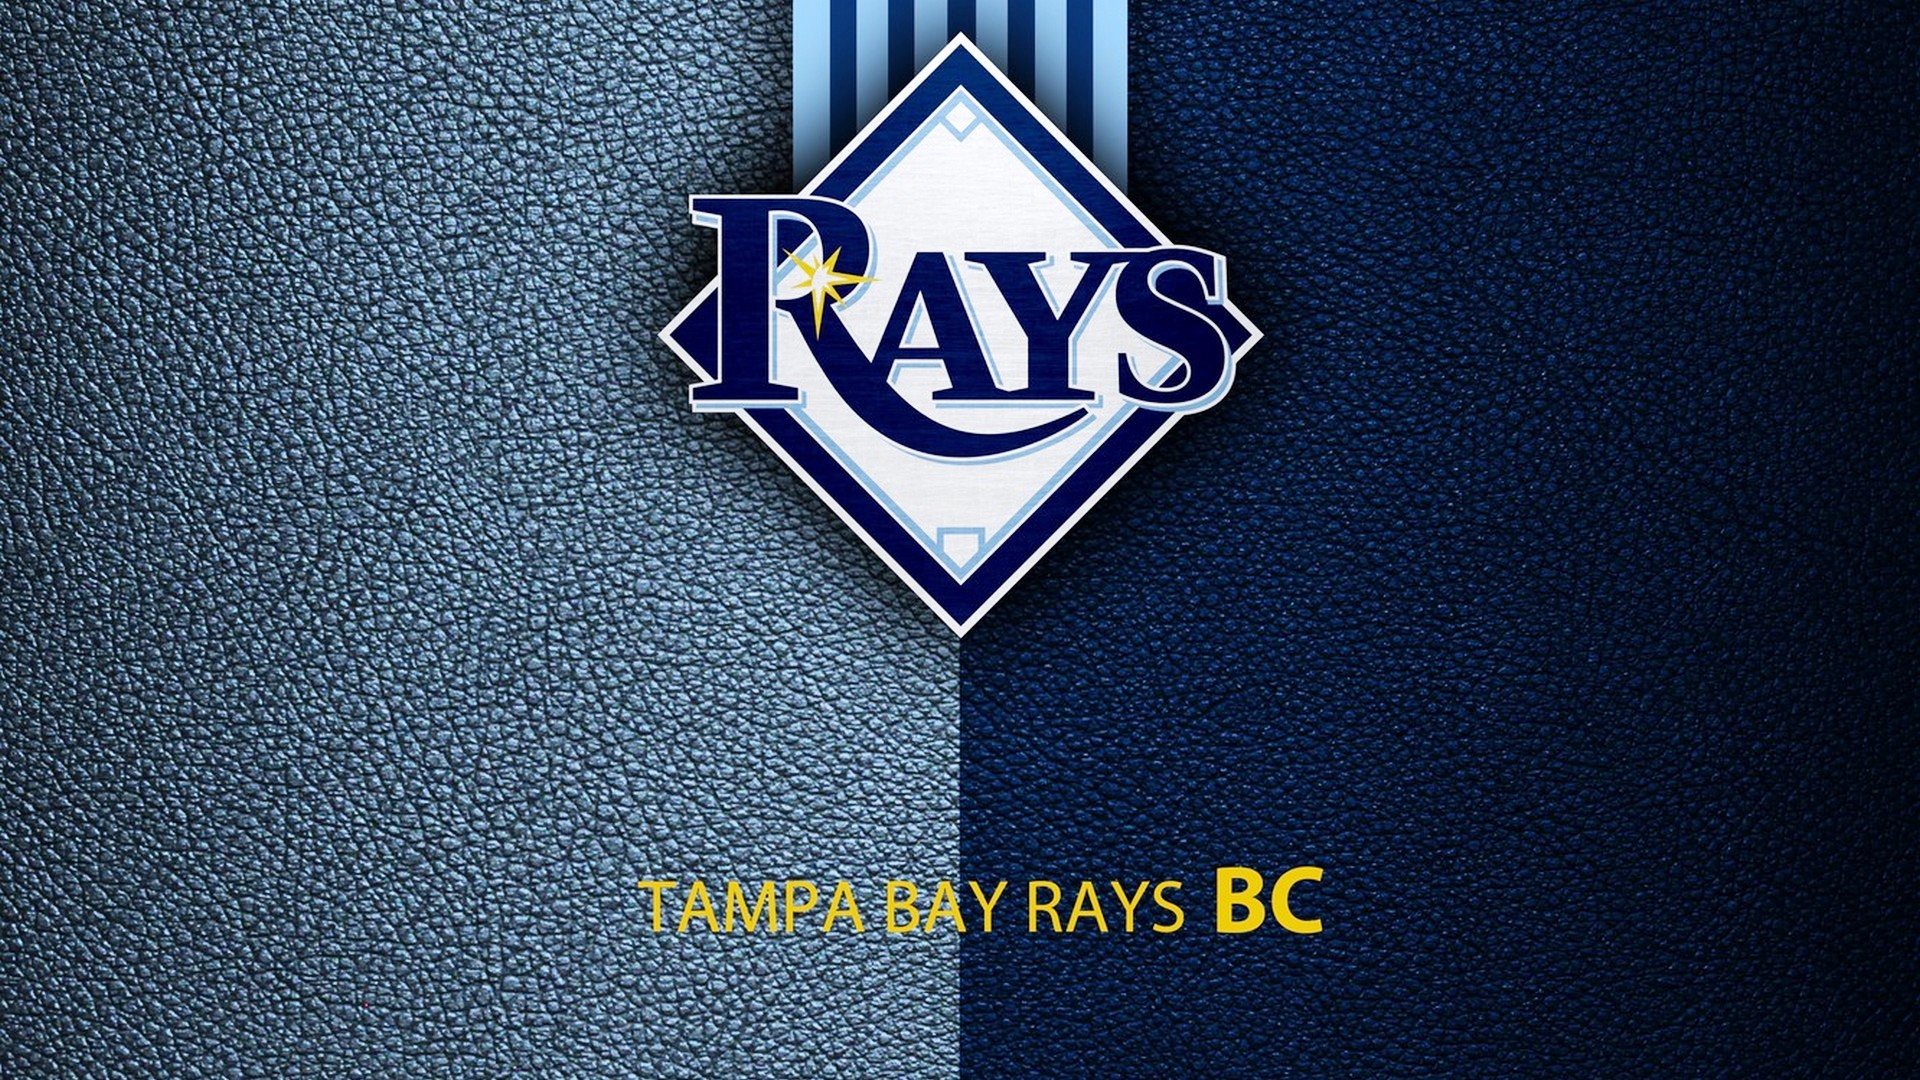 HD Tampa Bay Rays Logo Backgrounds with high-resolution 1920x1080 pixel. You can use this wallpaper for Mac Desktop Wallpaper, Laptop Screensavers, Android Wallpapers, Tablet or iPhone Home Screen and another mobile phone device